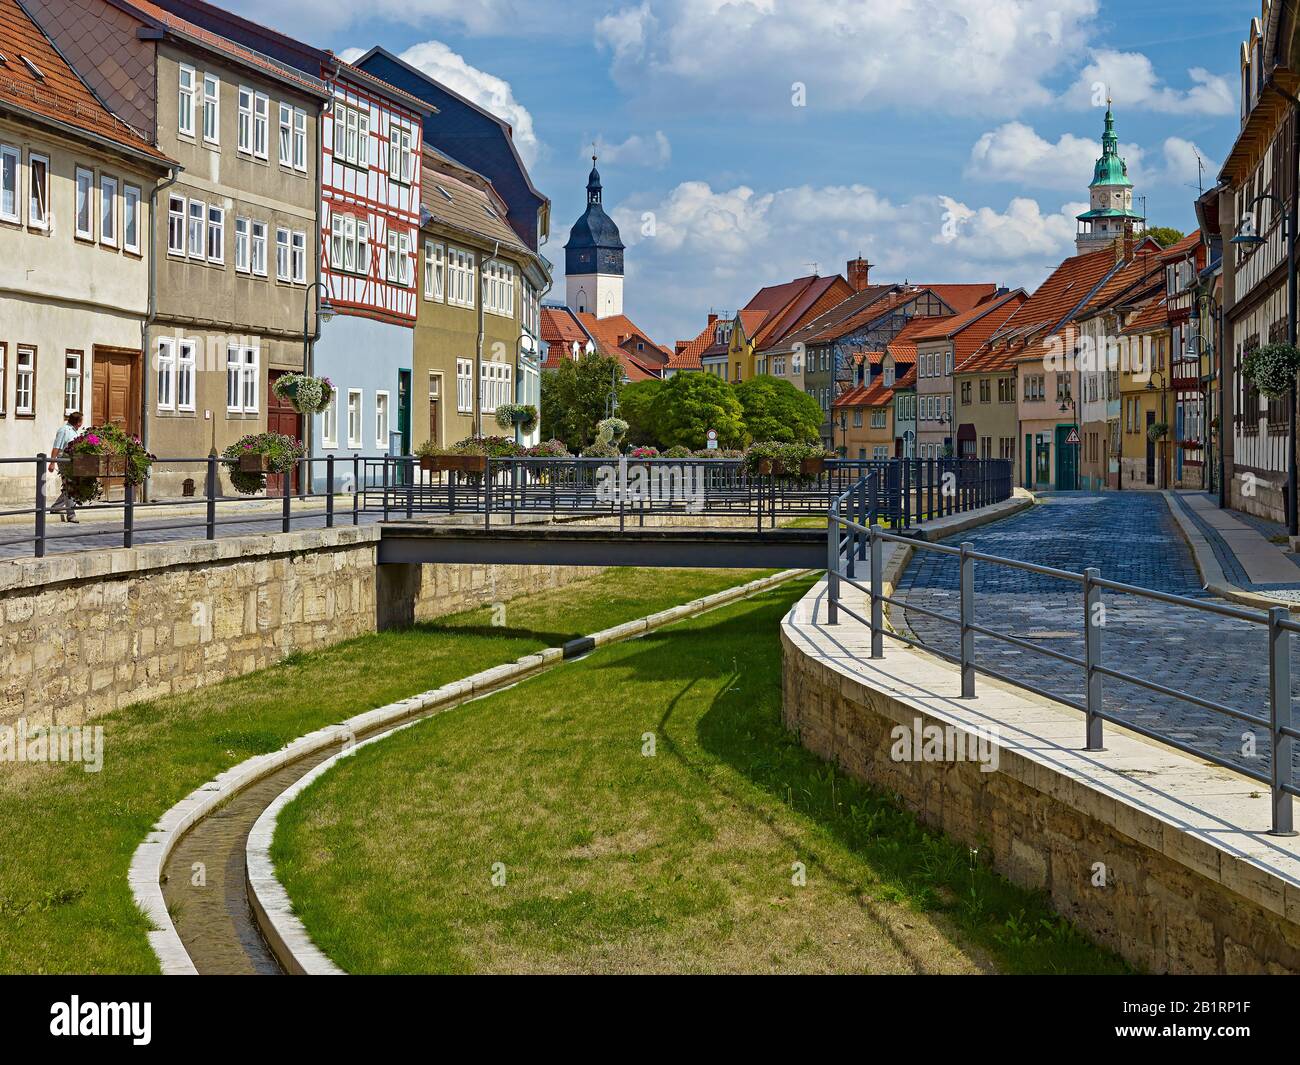 Long street with town hall tower and church tower of Bonifatiuskirche in Bad Langensalza, Thuringia, Germany, Stock Photo